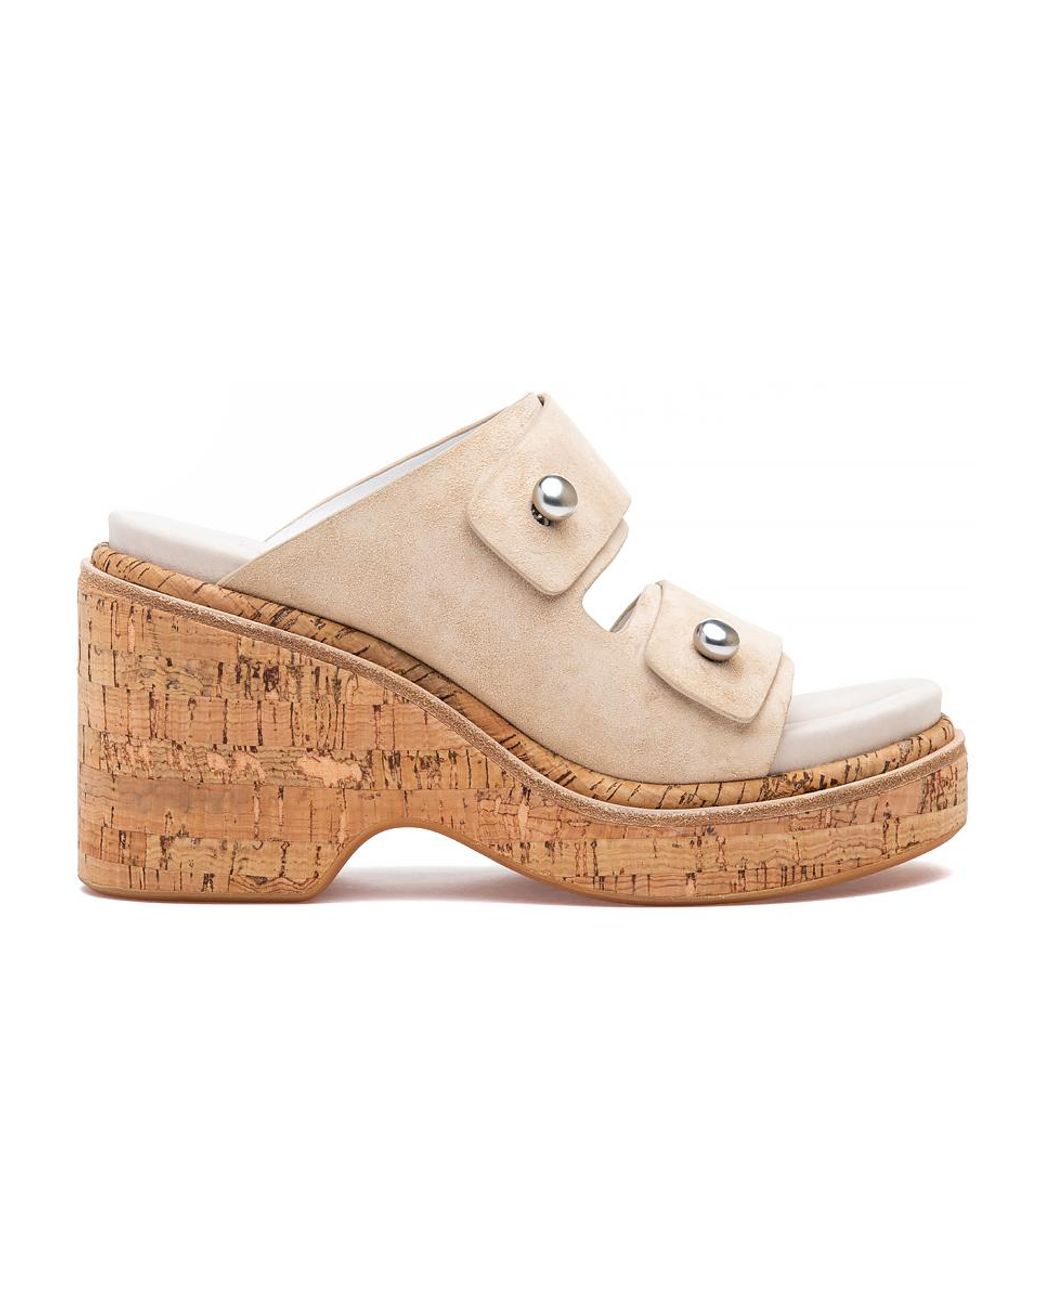 Rag & Bone Sommer Sandal Stone Beige Suede in Taupe (Natural) - Lyst